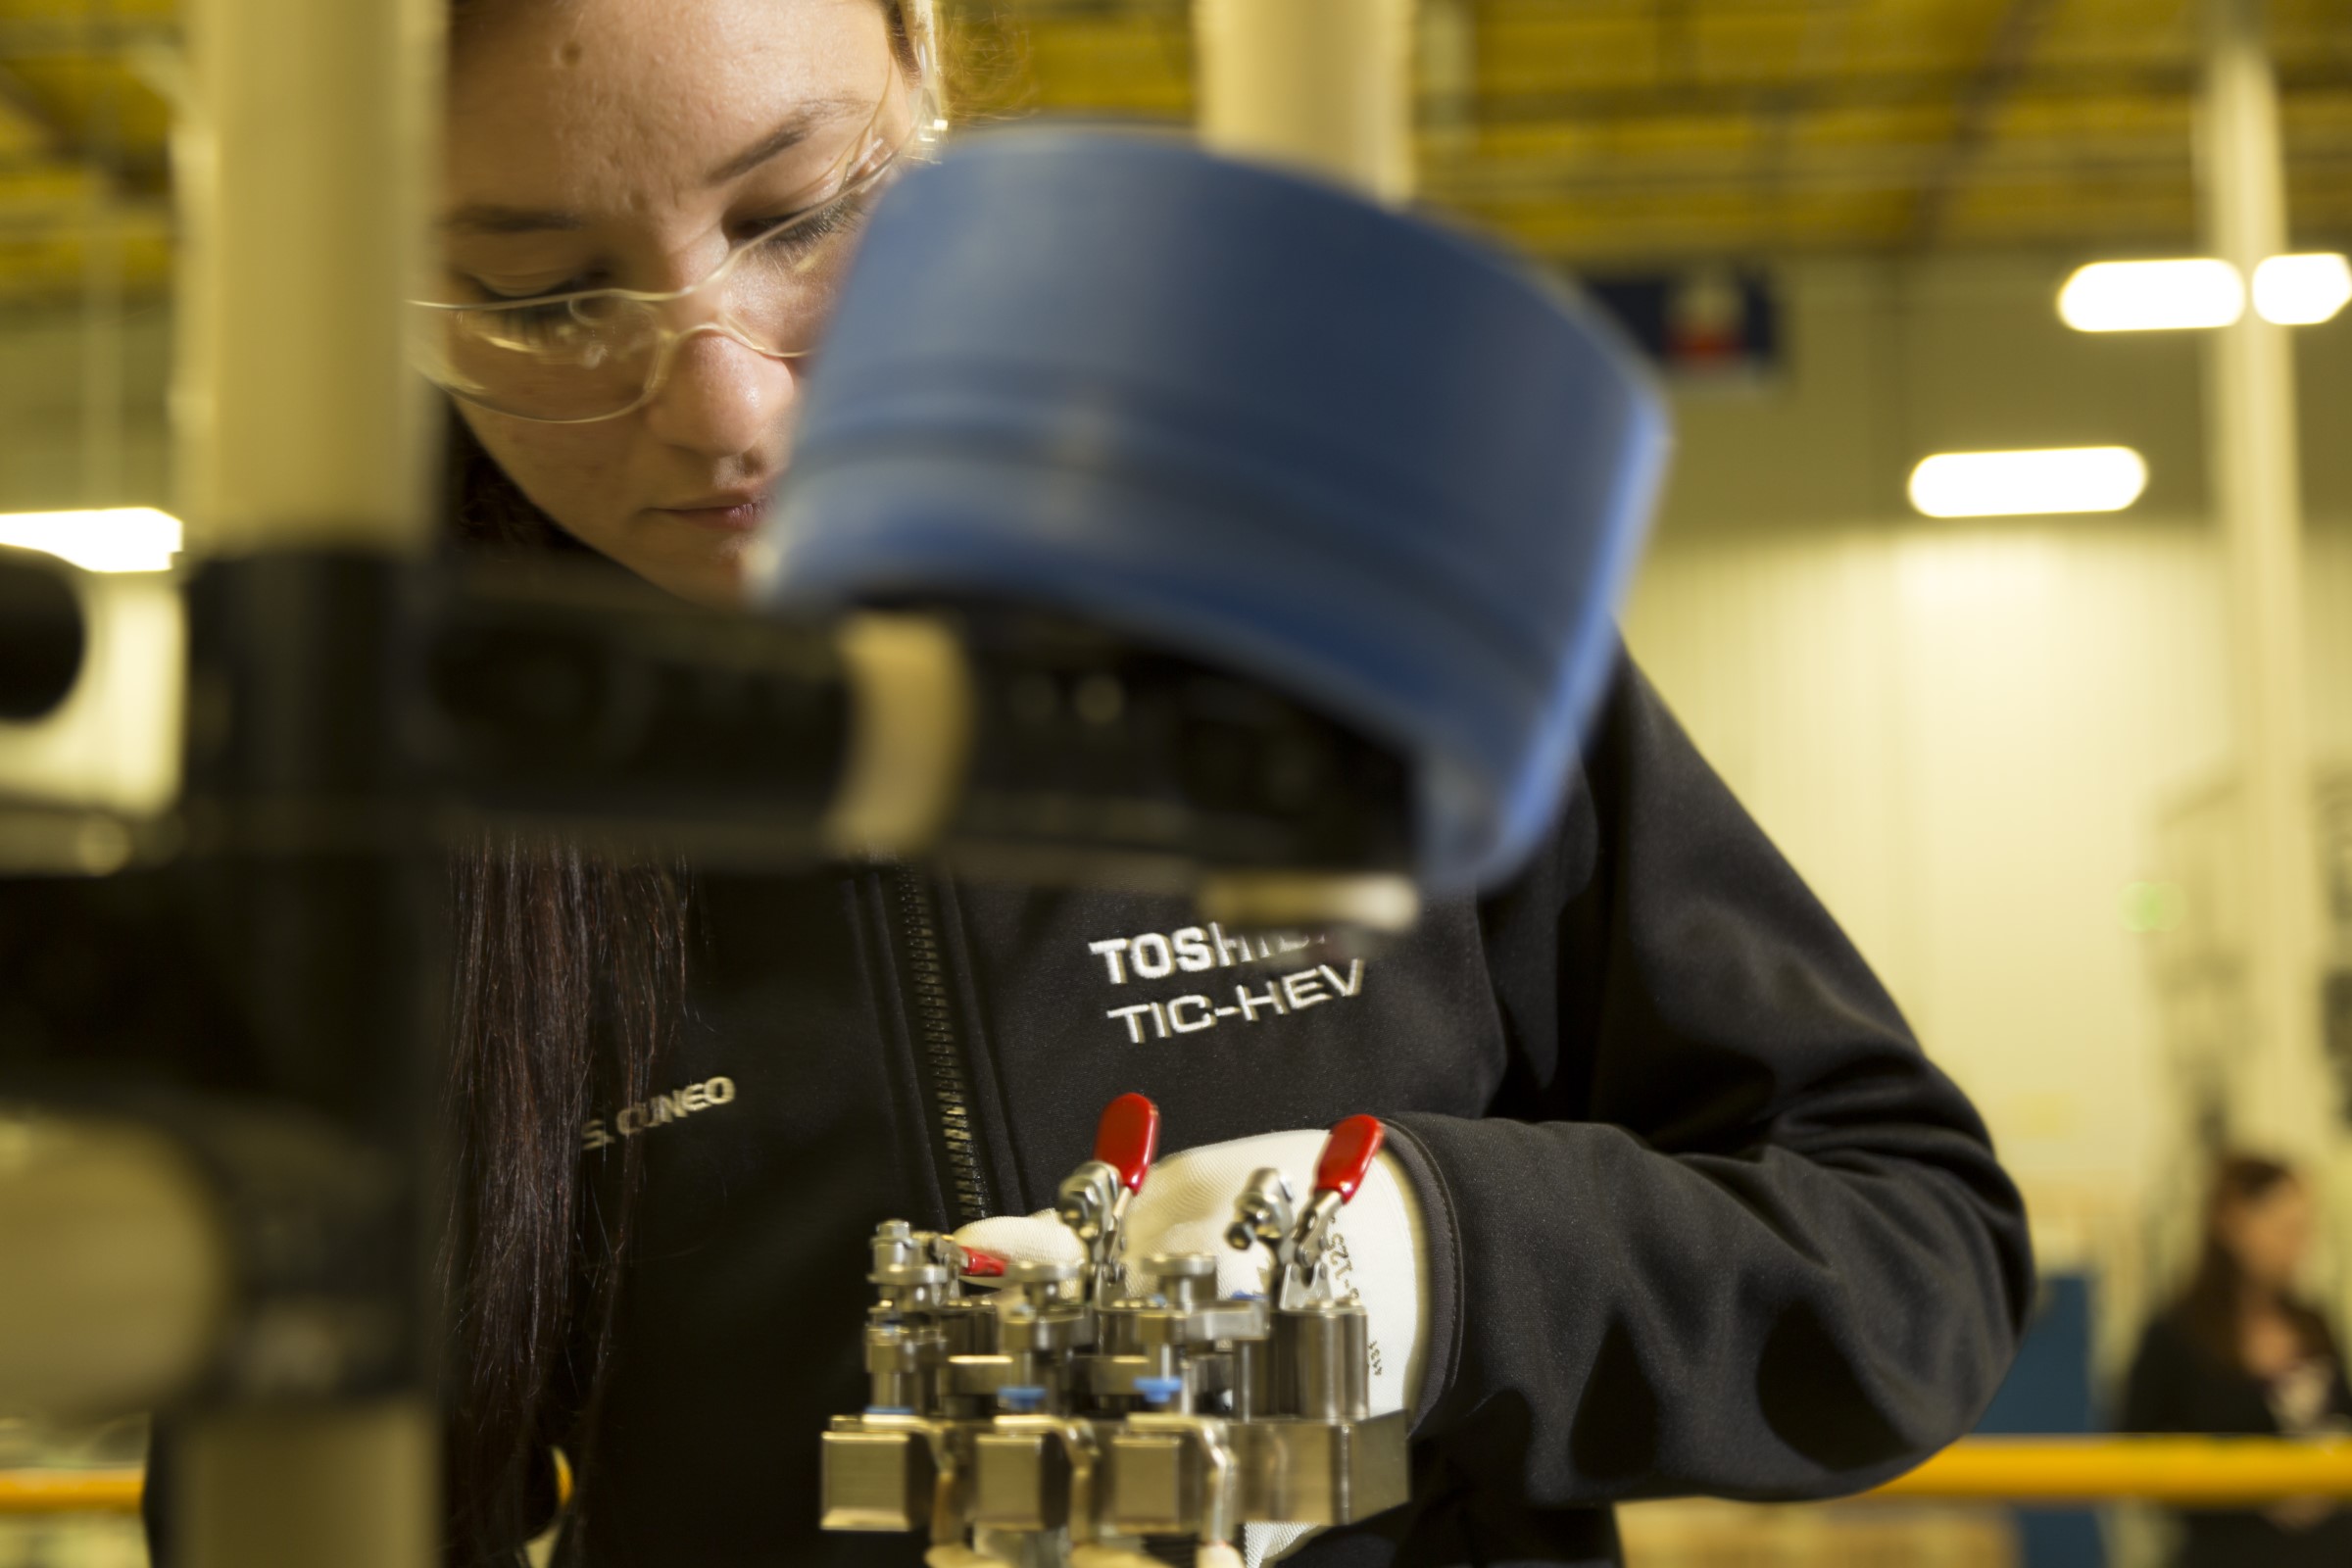 A female worker in an advanced manufacturing role